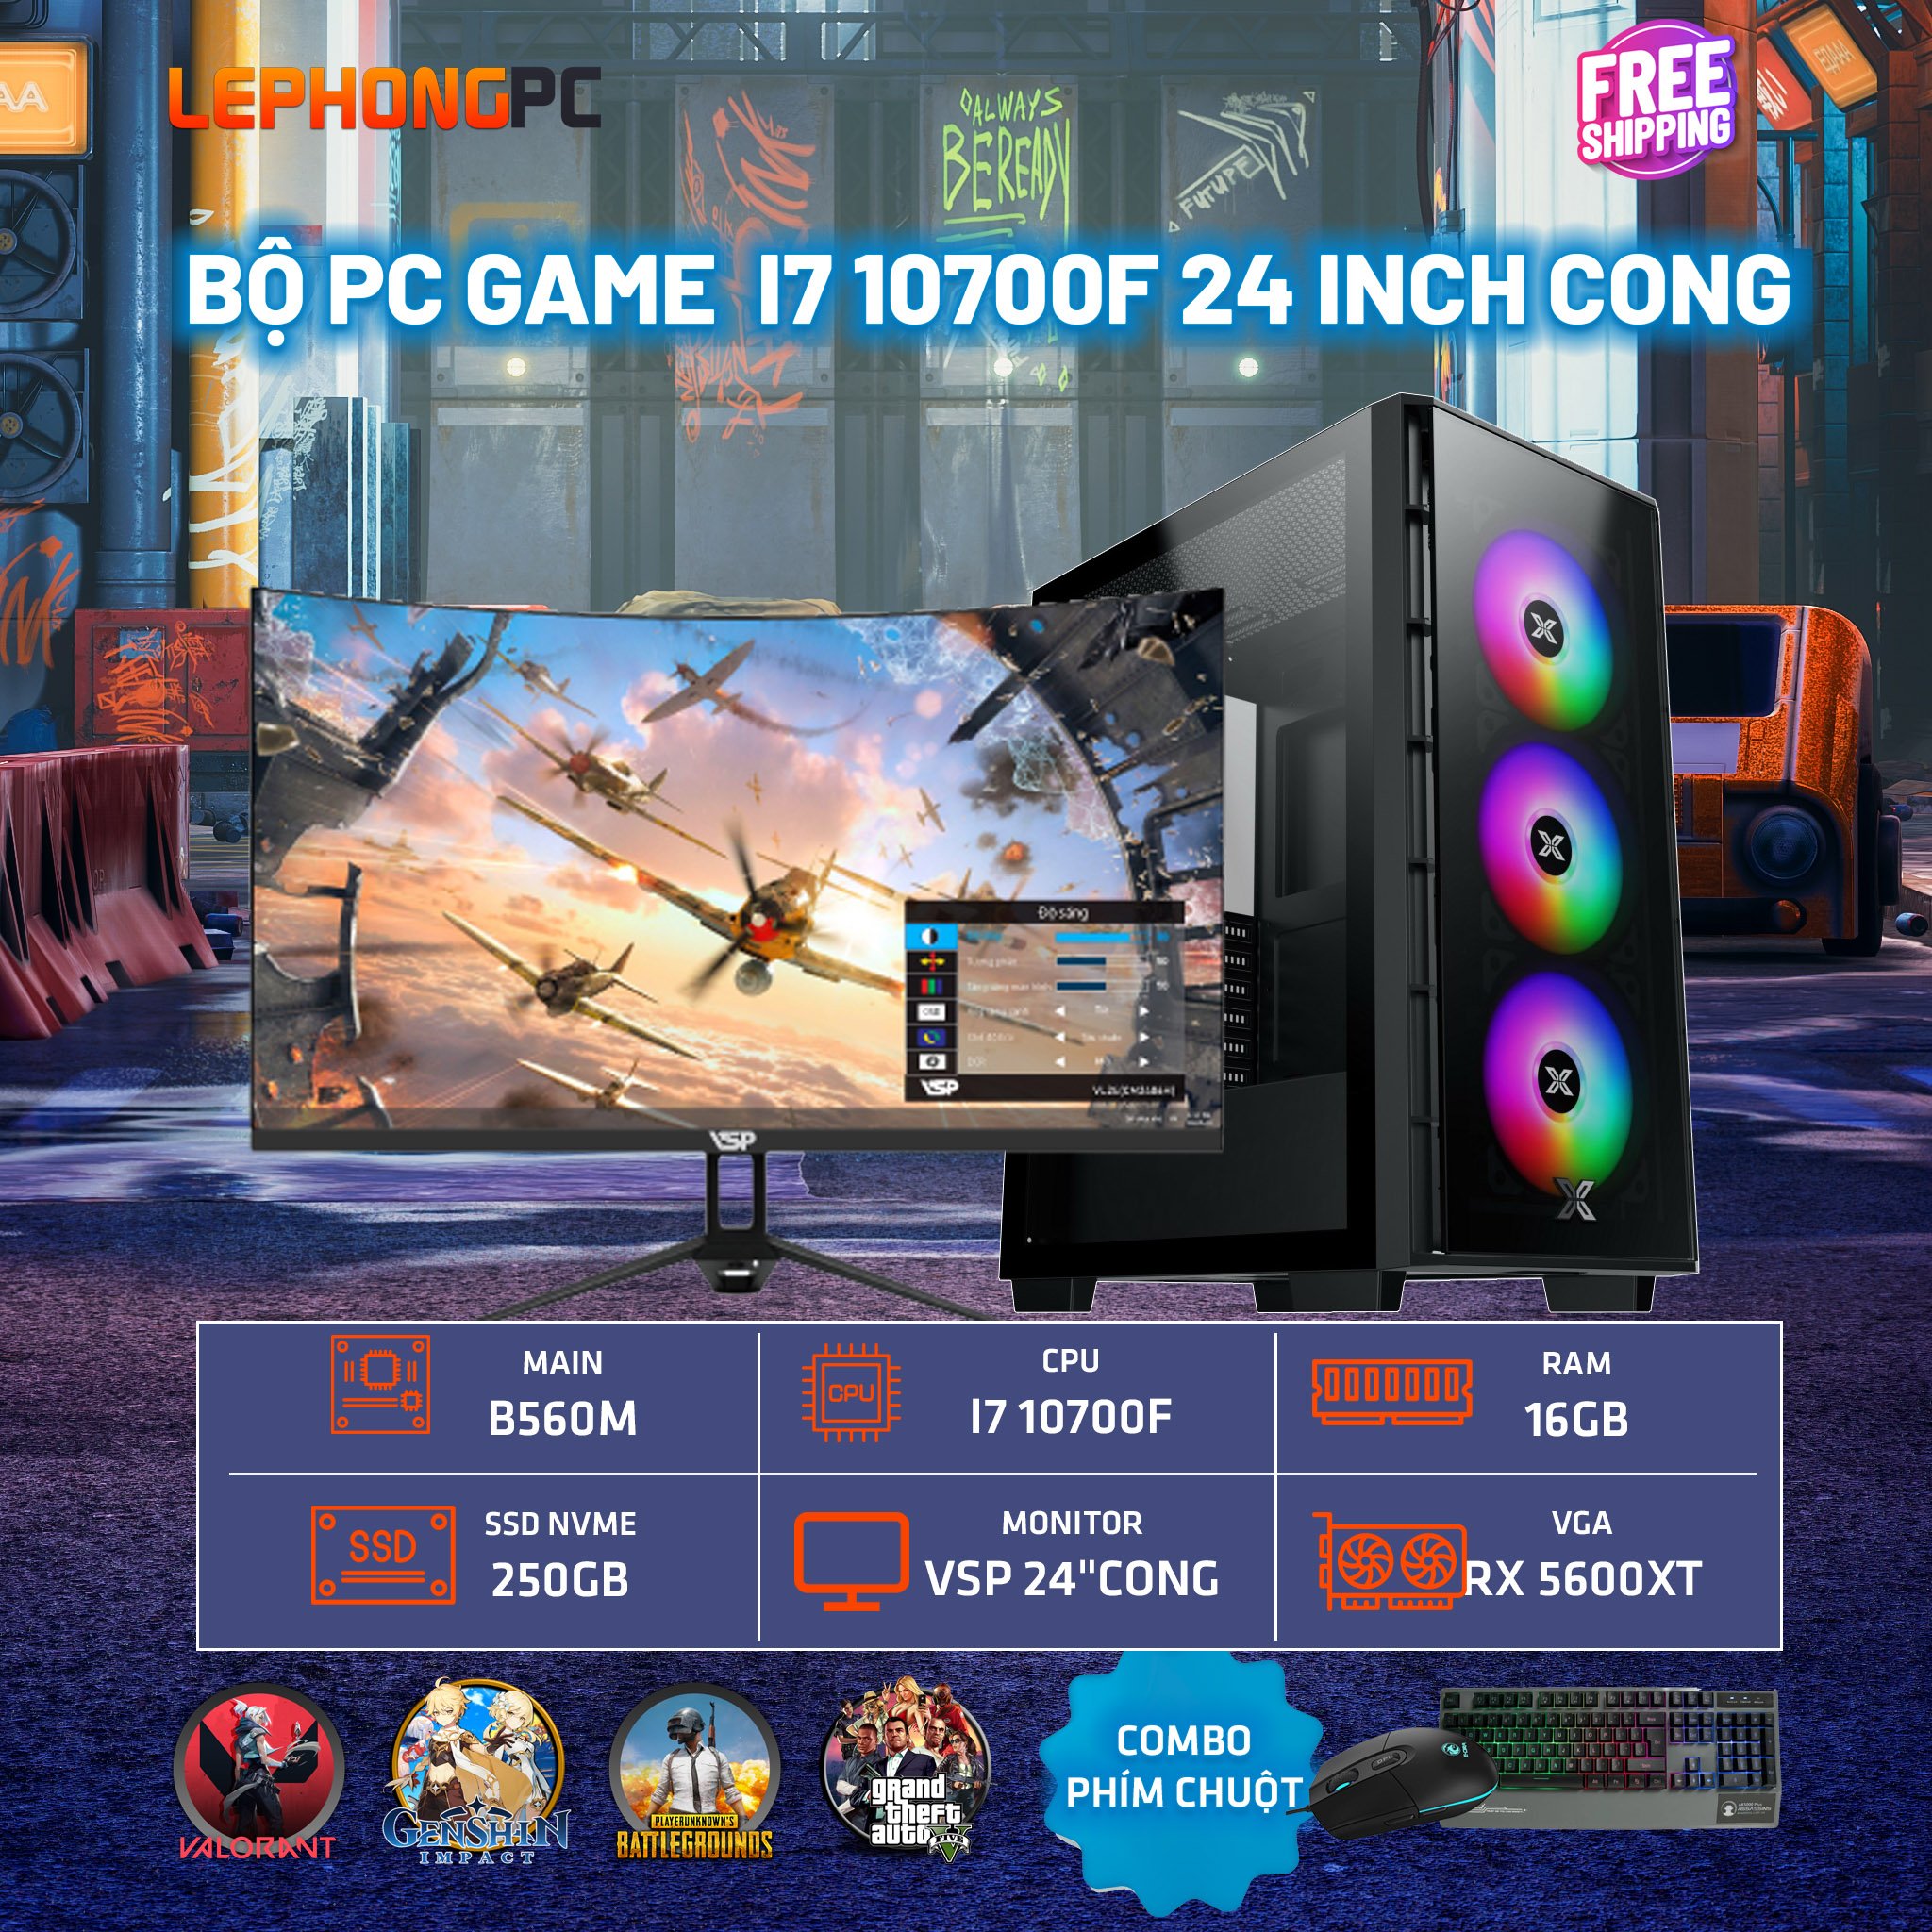 BO PC GAME I7 10700F 24 INCH CONG